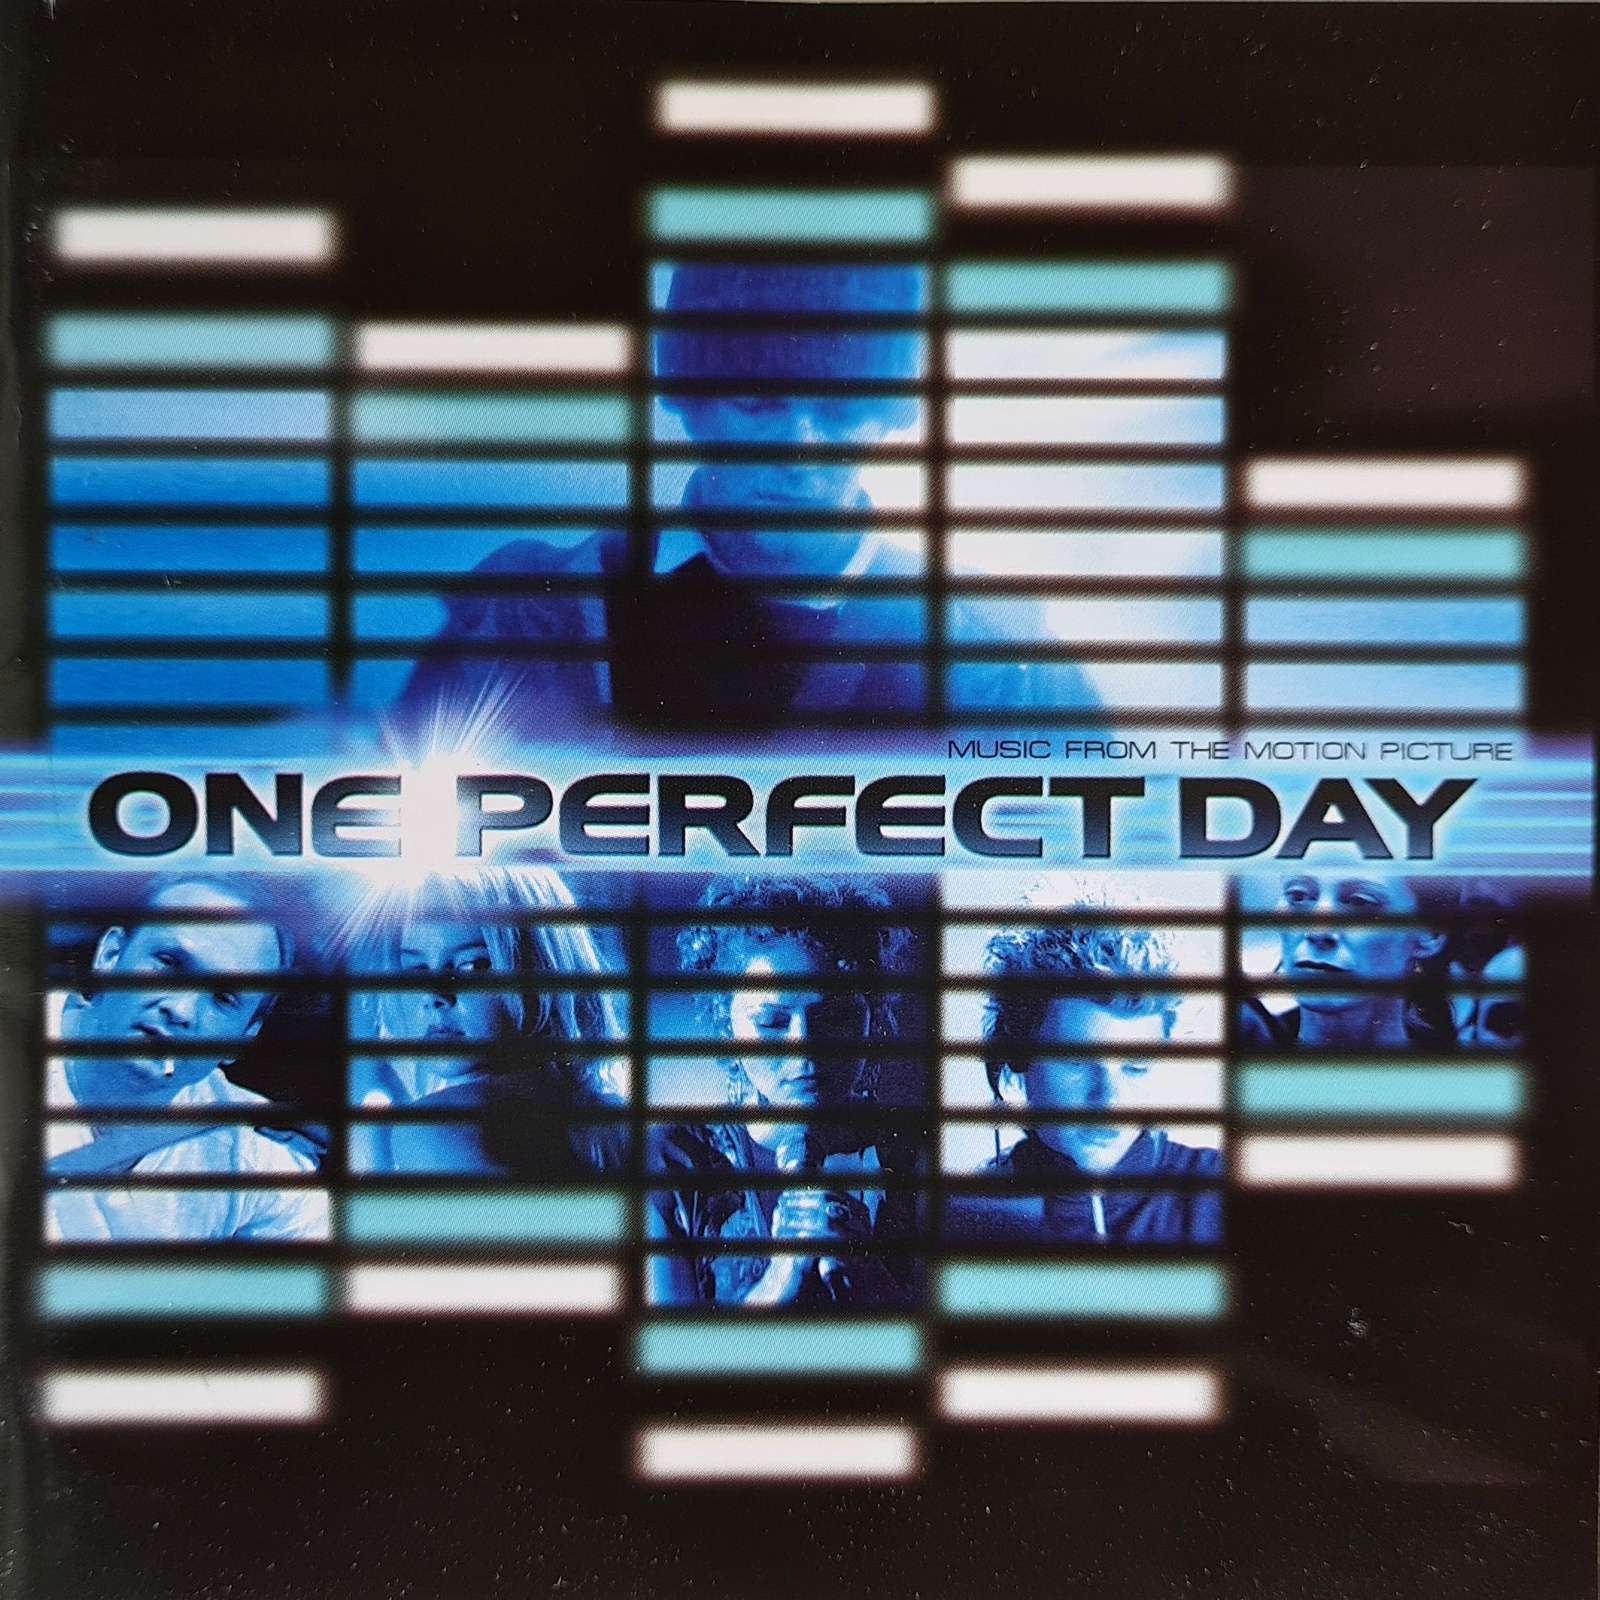 One Perfect Day - Music from the Motion Picture (CD)